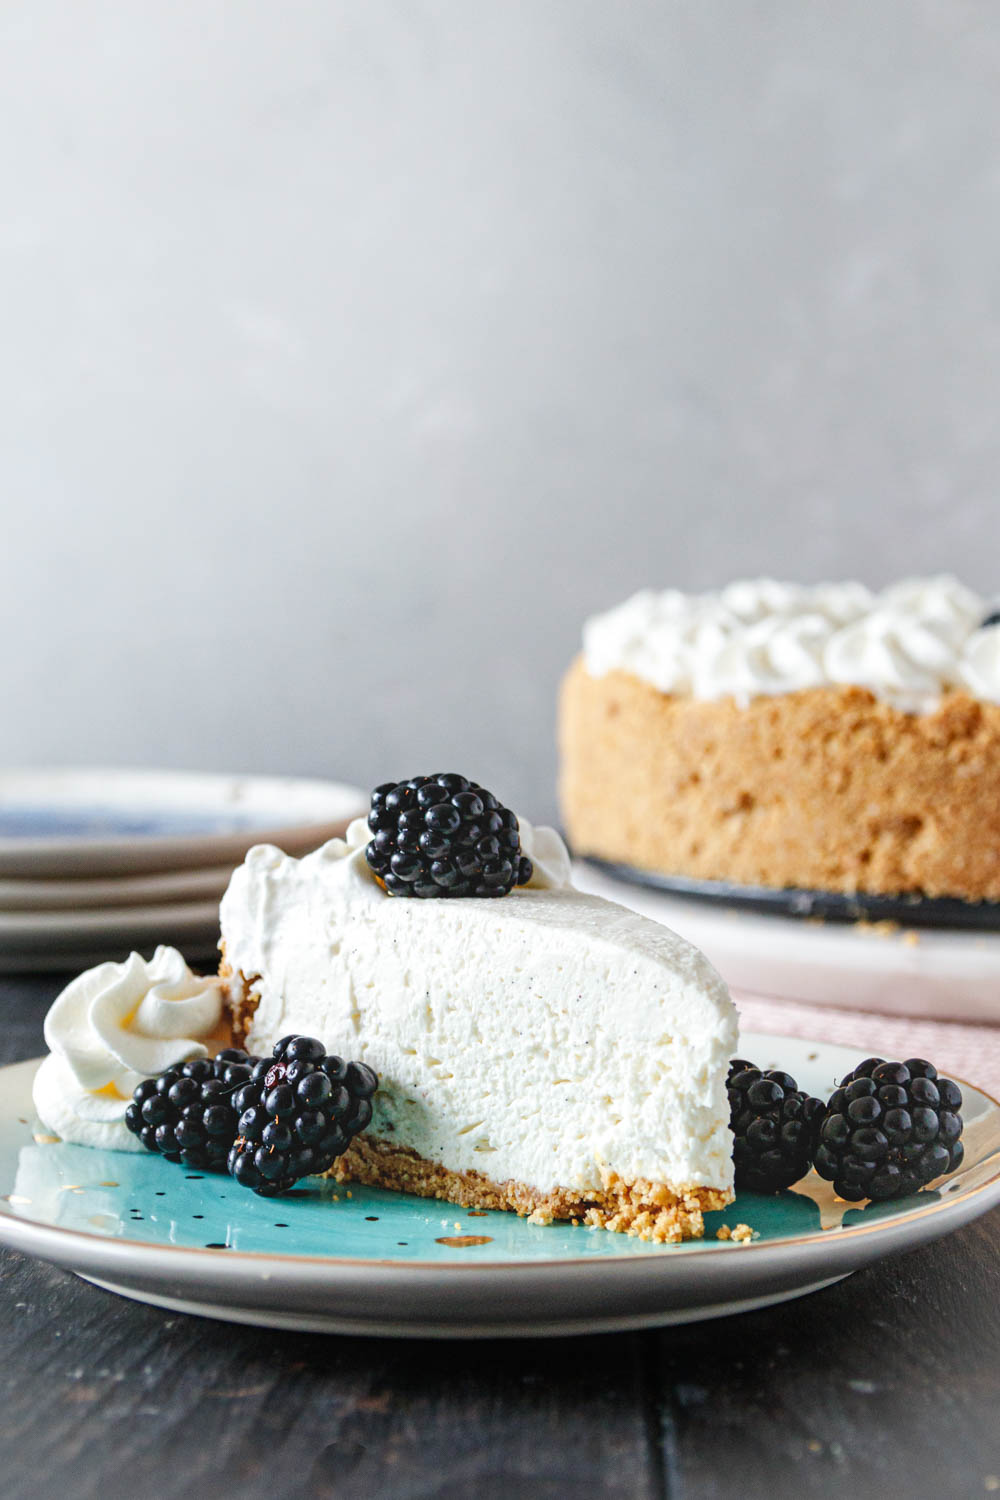 slice of cheesecake on a plate with blackberries and a bit of stabilized whipped cream